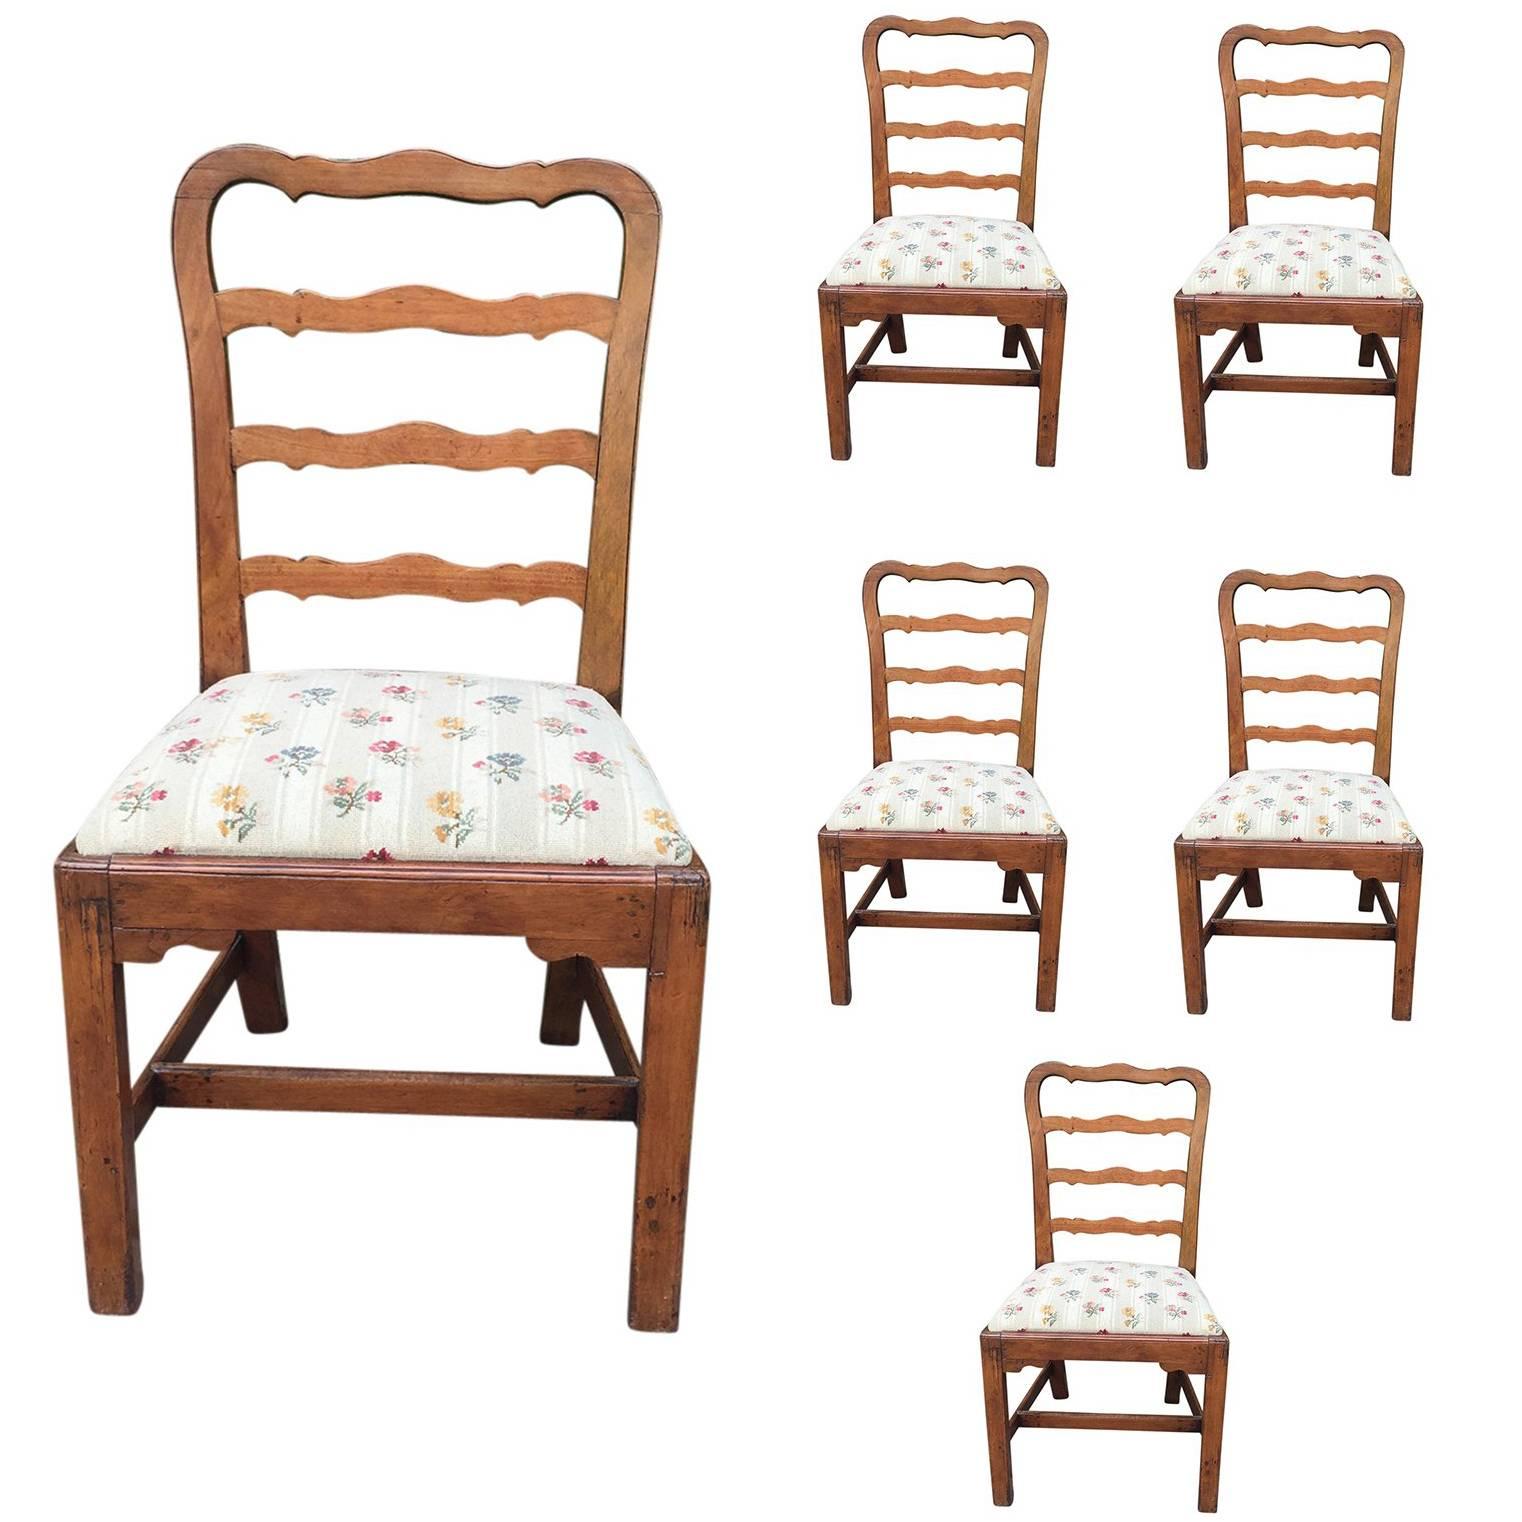 Set of Six 18th-19th Century English George III Ladder Back Side Chairs